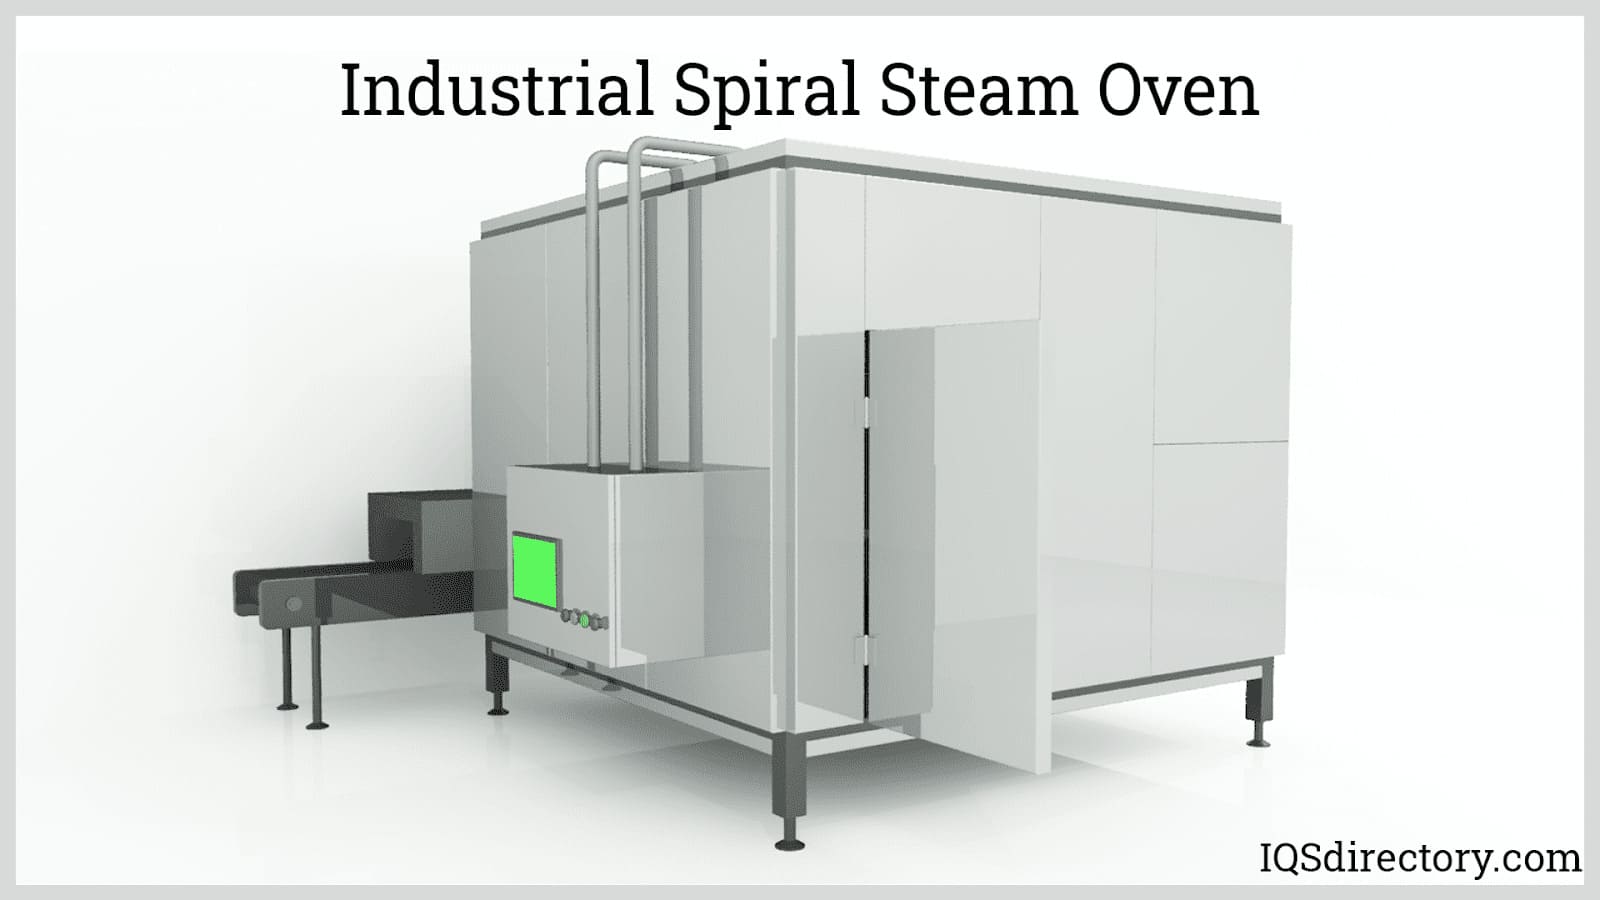 What Do You Need to Know About Industrial Ovens